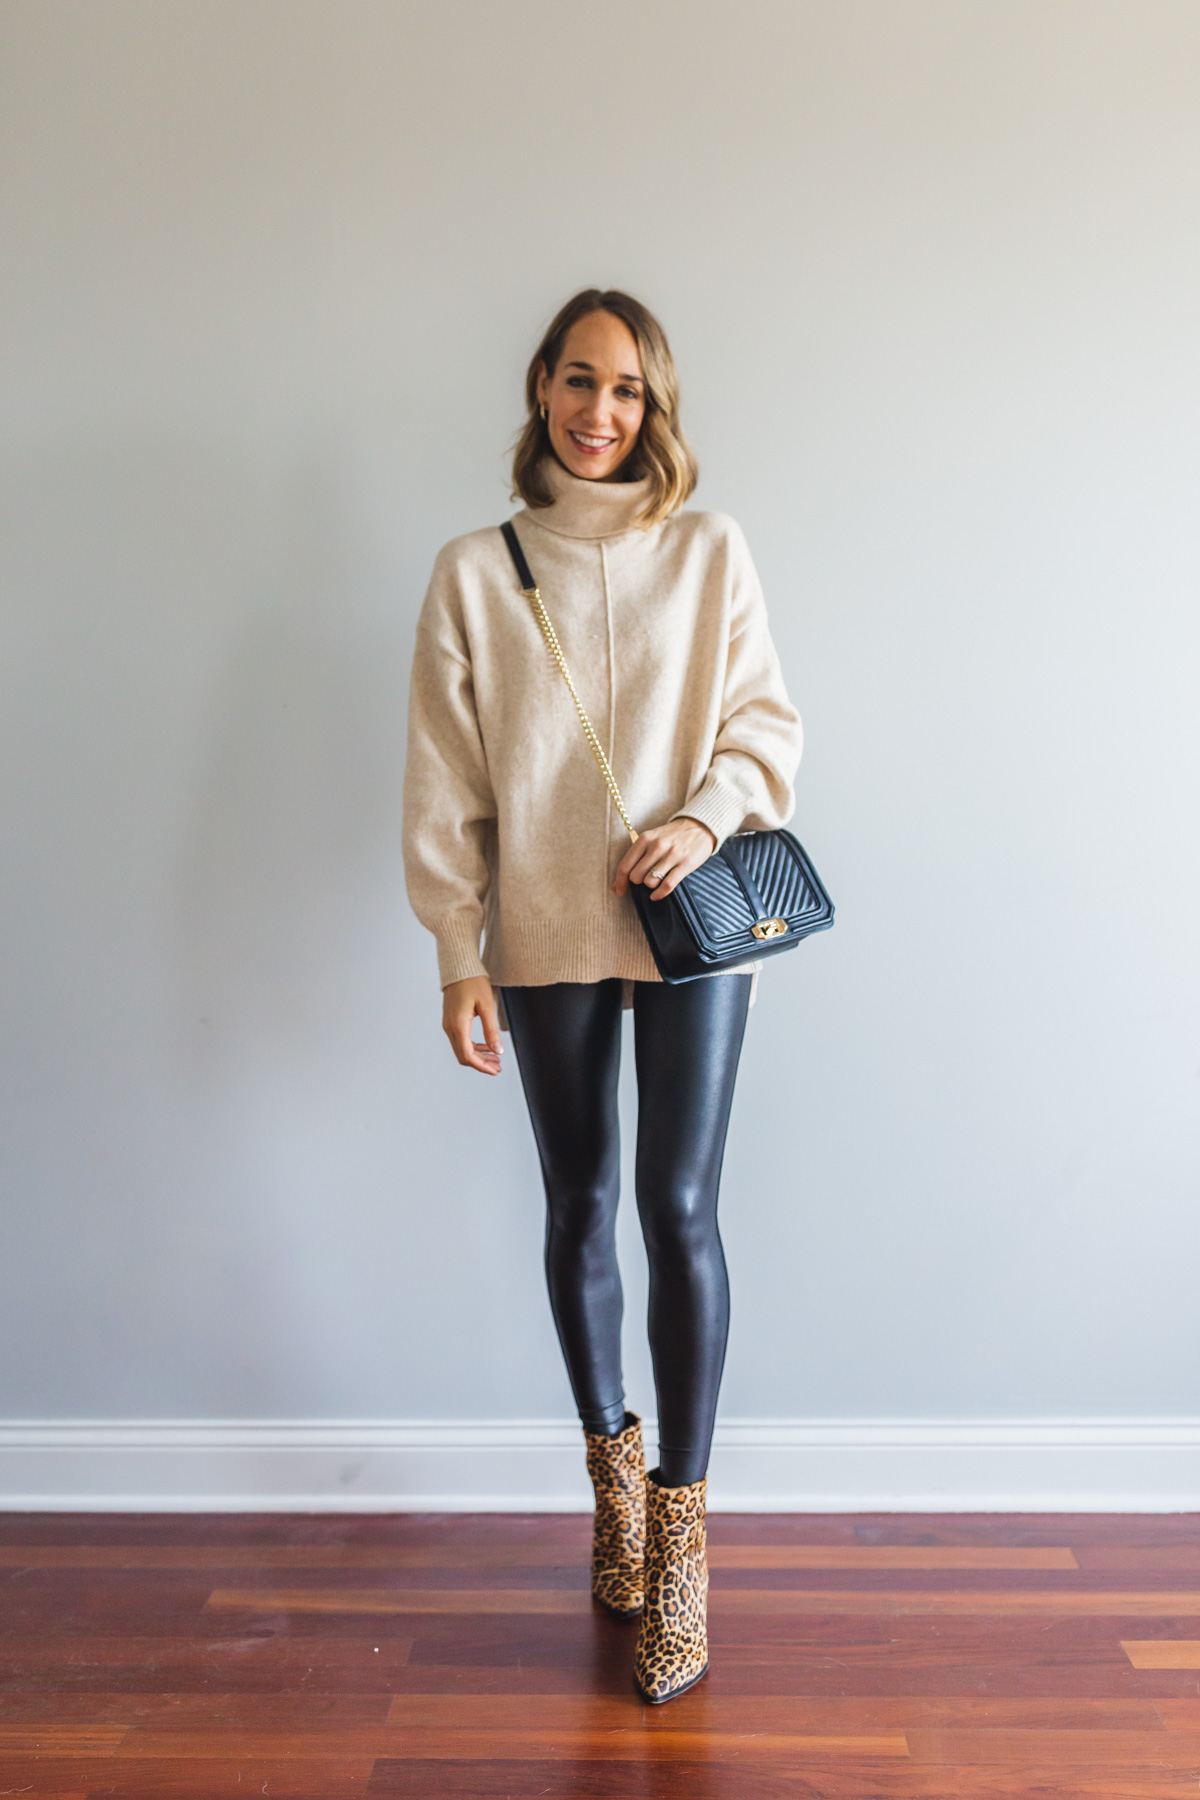 Spanx Faux Leather Leggings Review + 6 Ways to Style 